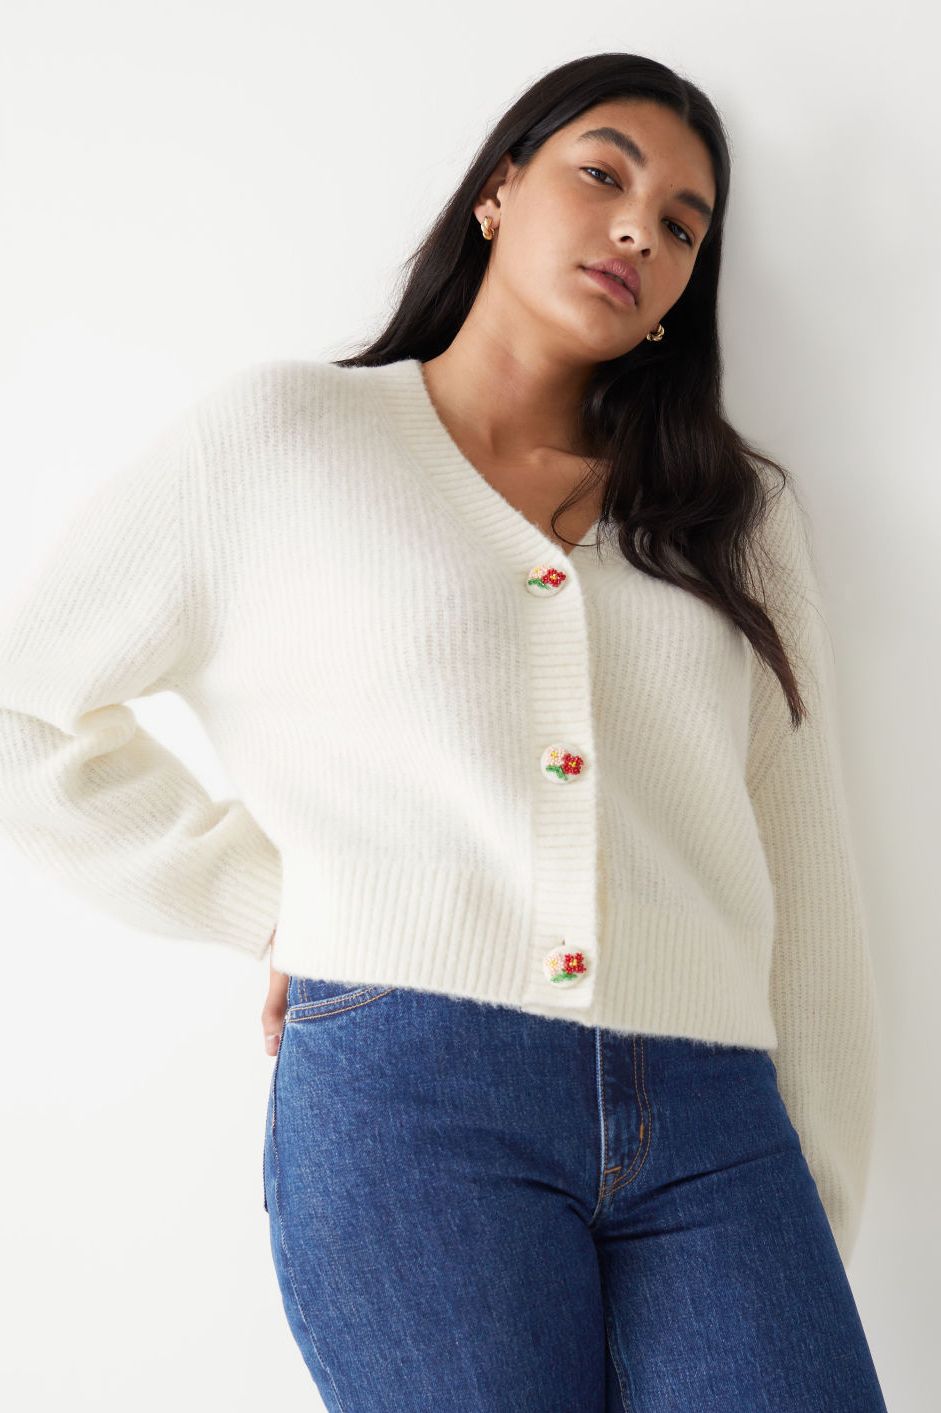 & Other Stories' sold-out cardigan is back in a new colour